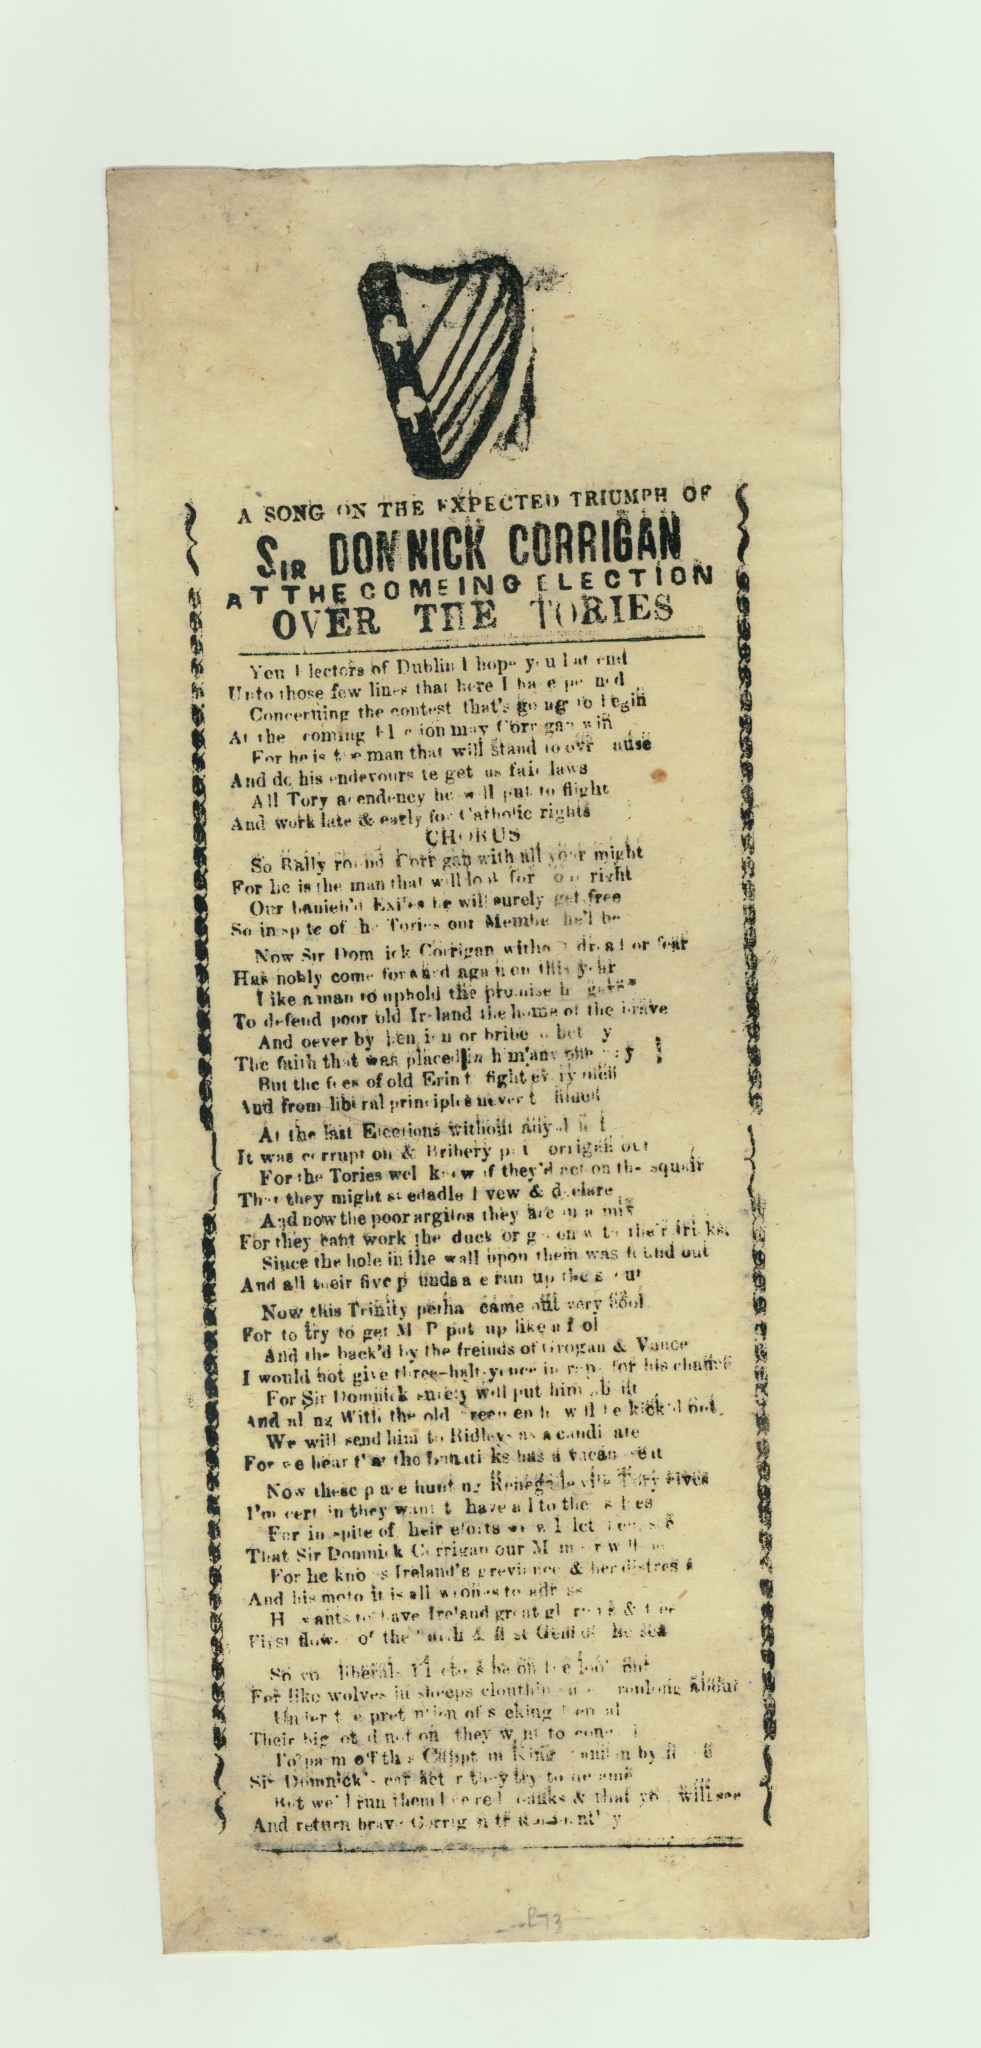 &quot;A Song on the Expected Triumph of Sir Domnick Corrigan at the Coming Election Over the Tories&quot;